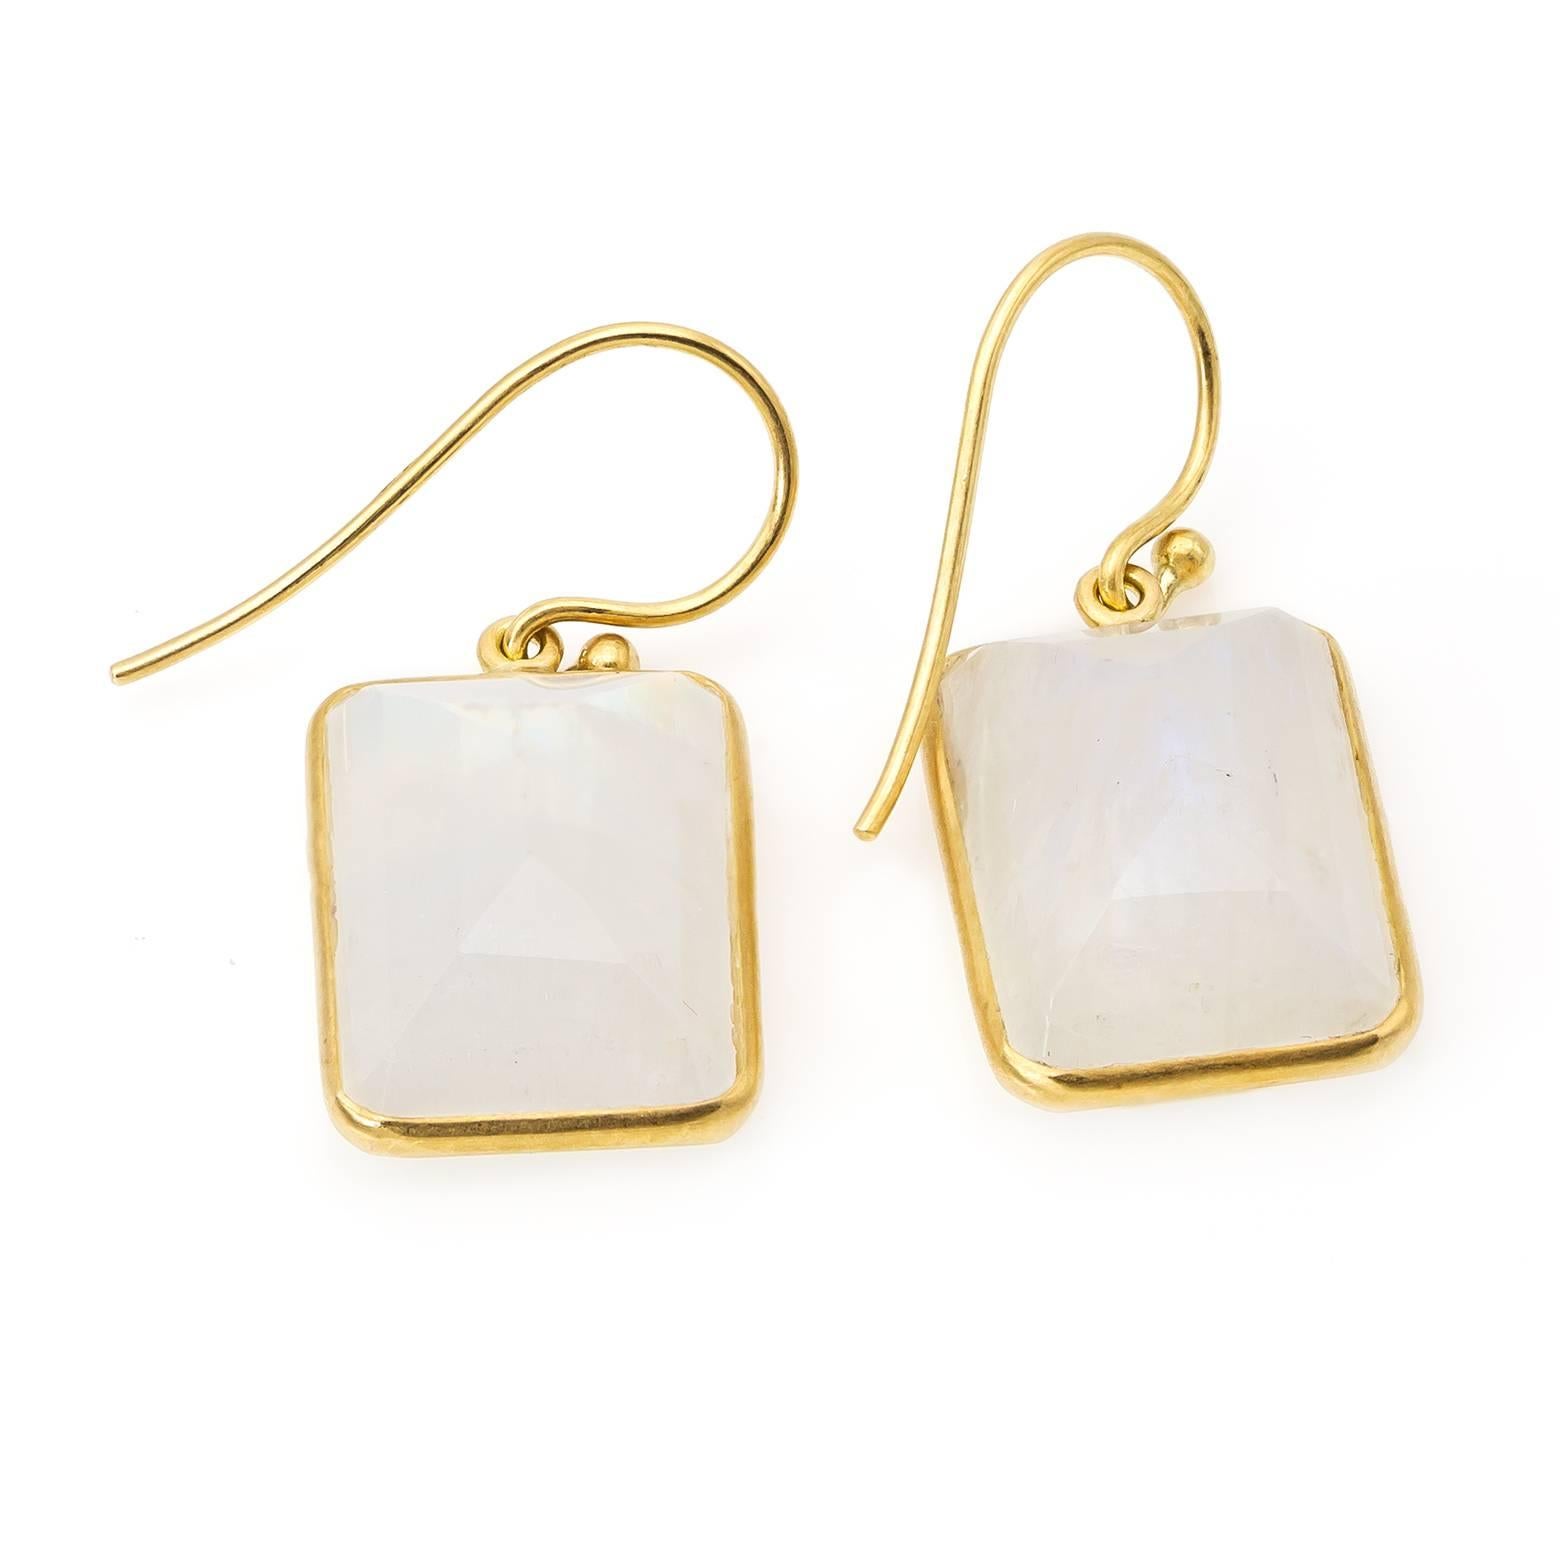 These dazzling white emerald-cut moonstone earrings glow and shine with depth of color and the cool blue labradoressence naturally found in moonstone.  Set in 18K yellow gold these substantial earrings offer an array of detail in classic white